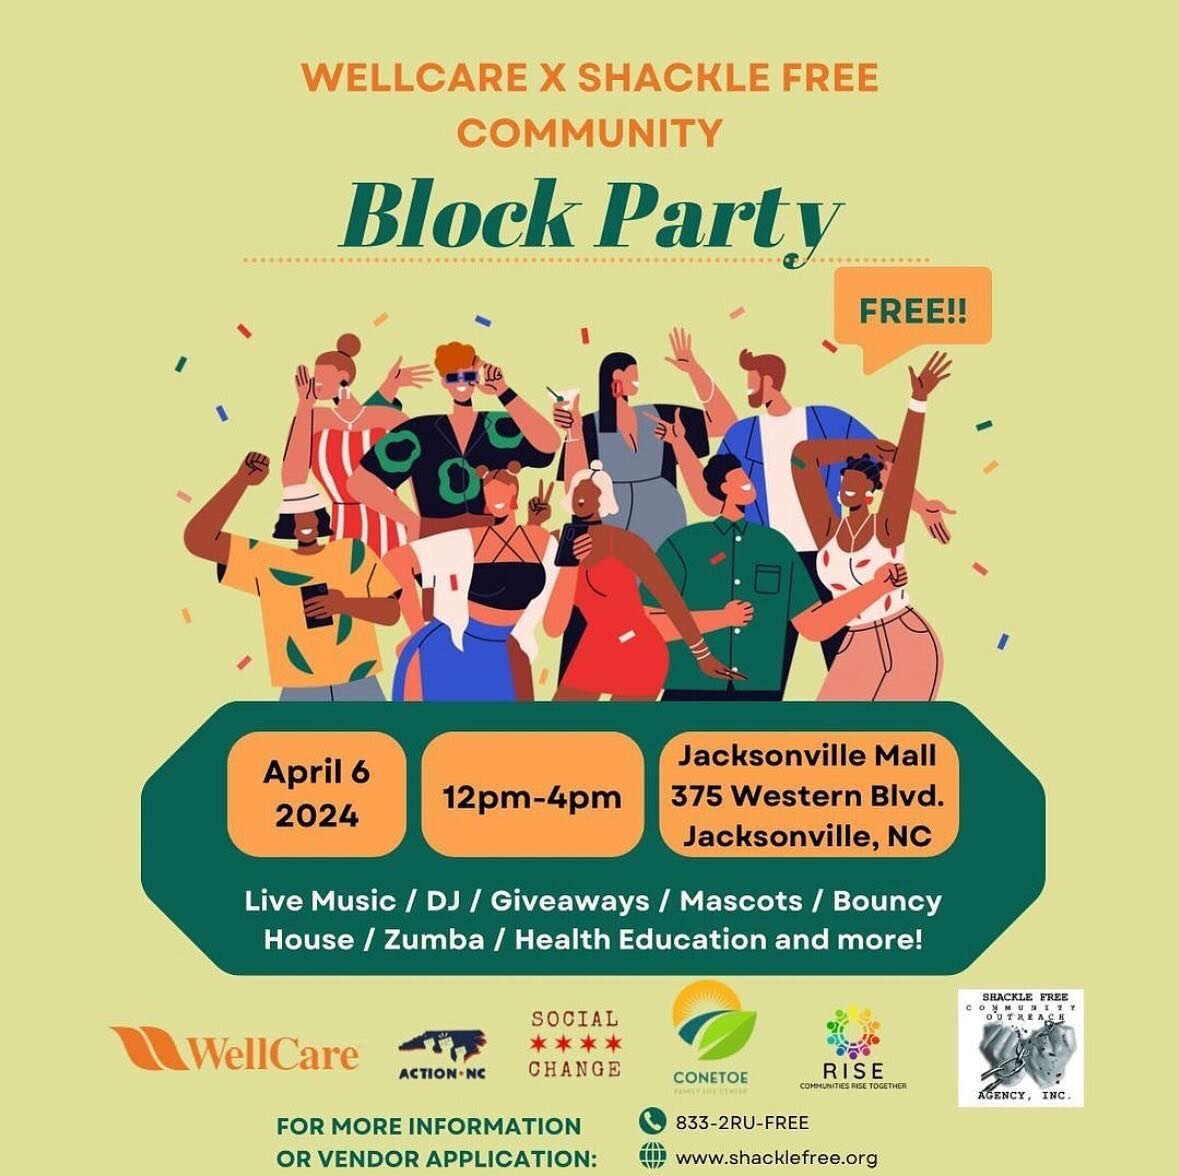 ⭐️ T O M O R R O W ⭐️

🎊Join us 4/6 for a day of fun, fitness, and community spirit at the WellCare x Shackle Free Community Block Party! 

🎊 It&rsquo;s a celebration with live music, a DJ, giveaways, and activities for all ages. Don&rsquo;t miss o